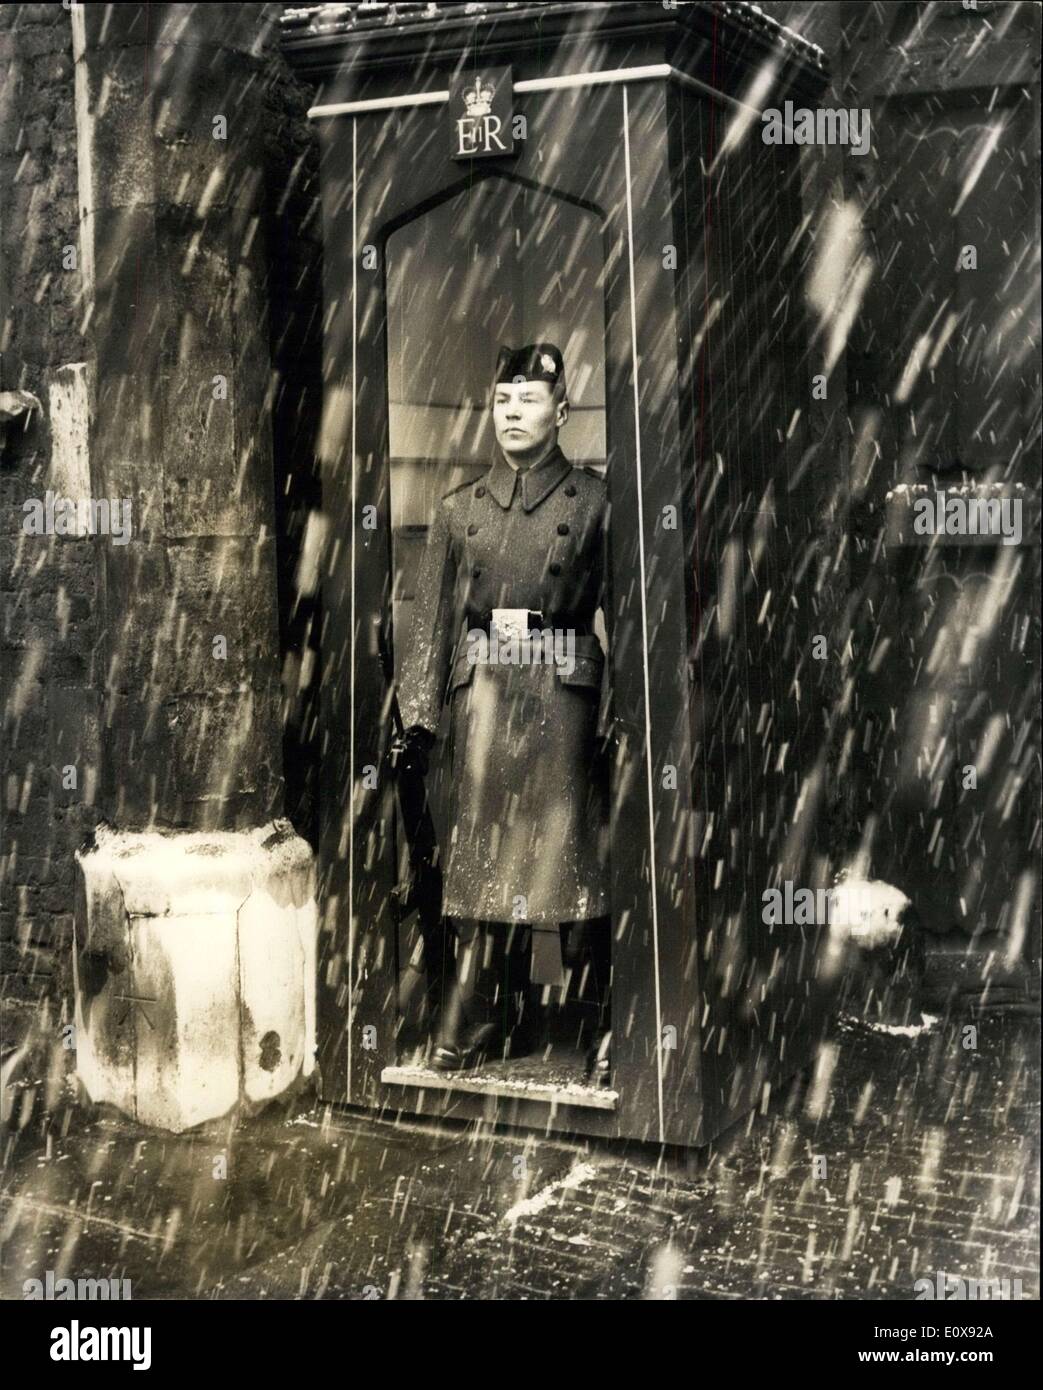 Nov. 22, 1965 - London Gets Its First Snowfall The Sentry Takes Cover In His Sentry-Box. Photo shows This sentry of the 1st Battalion The Cameronians on guard duty at St. Jame's Palace, makes full use of his sentry box in today's snow showers. Stock Photo